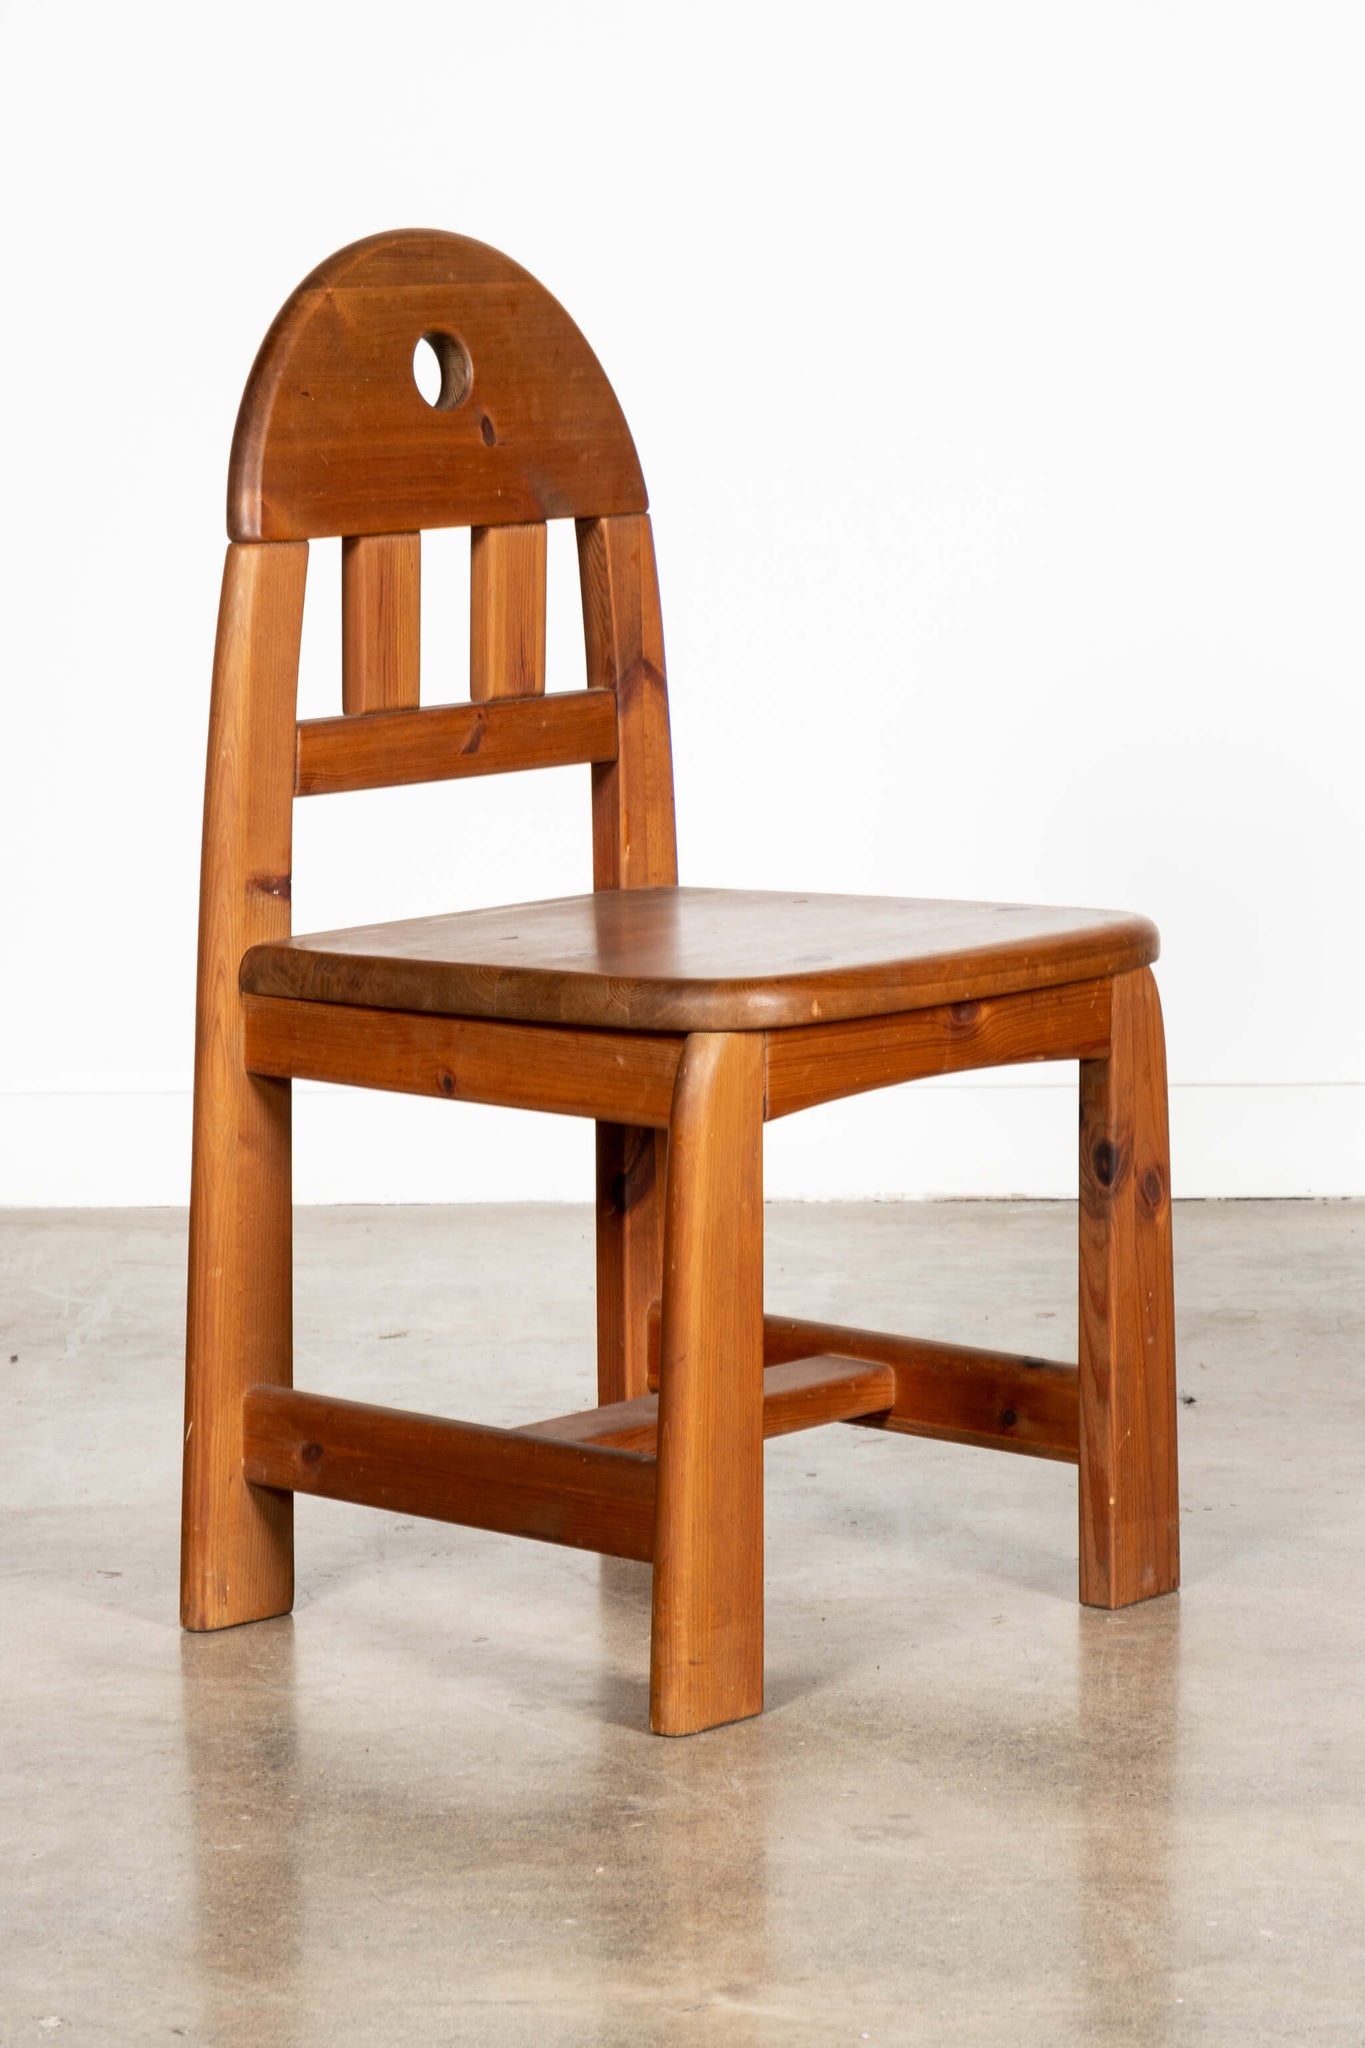 Bonne Choice -French Pine "Play" Chairs x8, sold individually